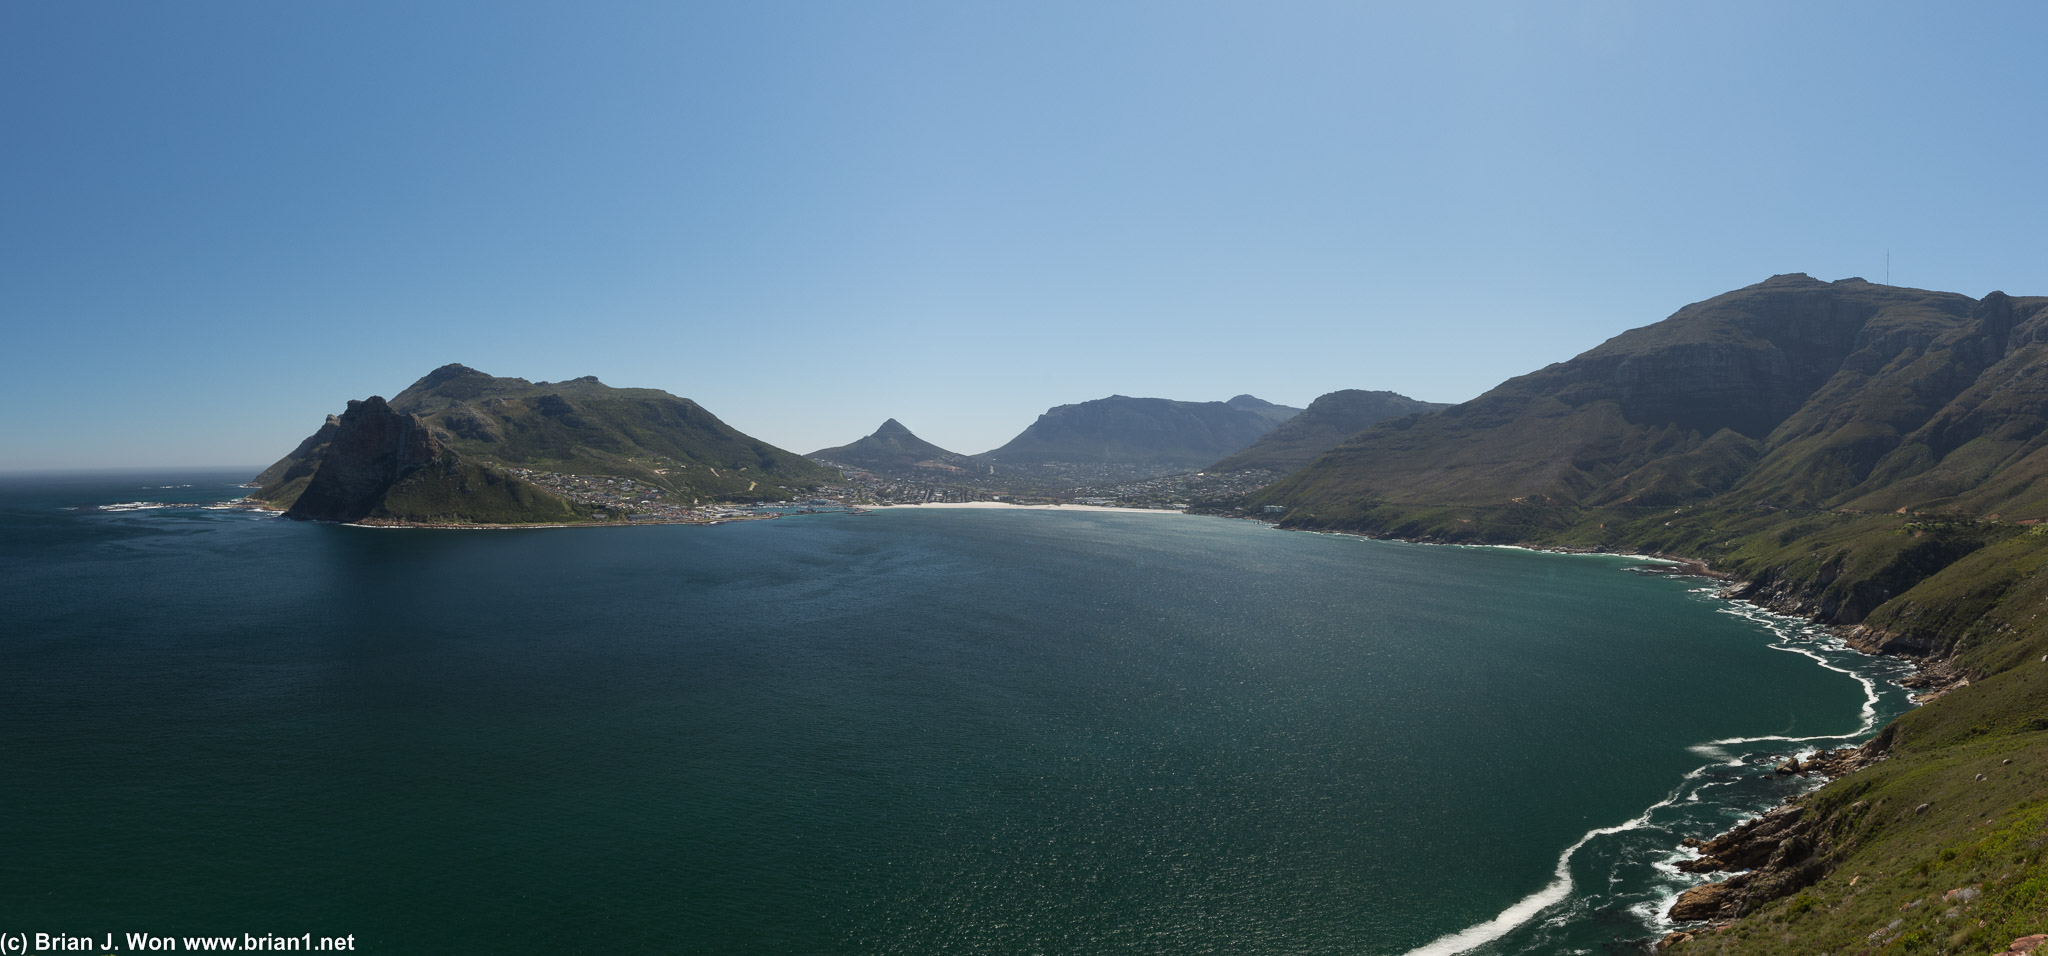 Hout Bay as viewed from Chapmans Peak Drive.